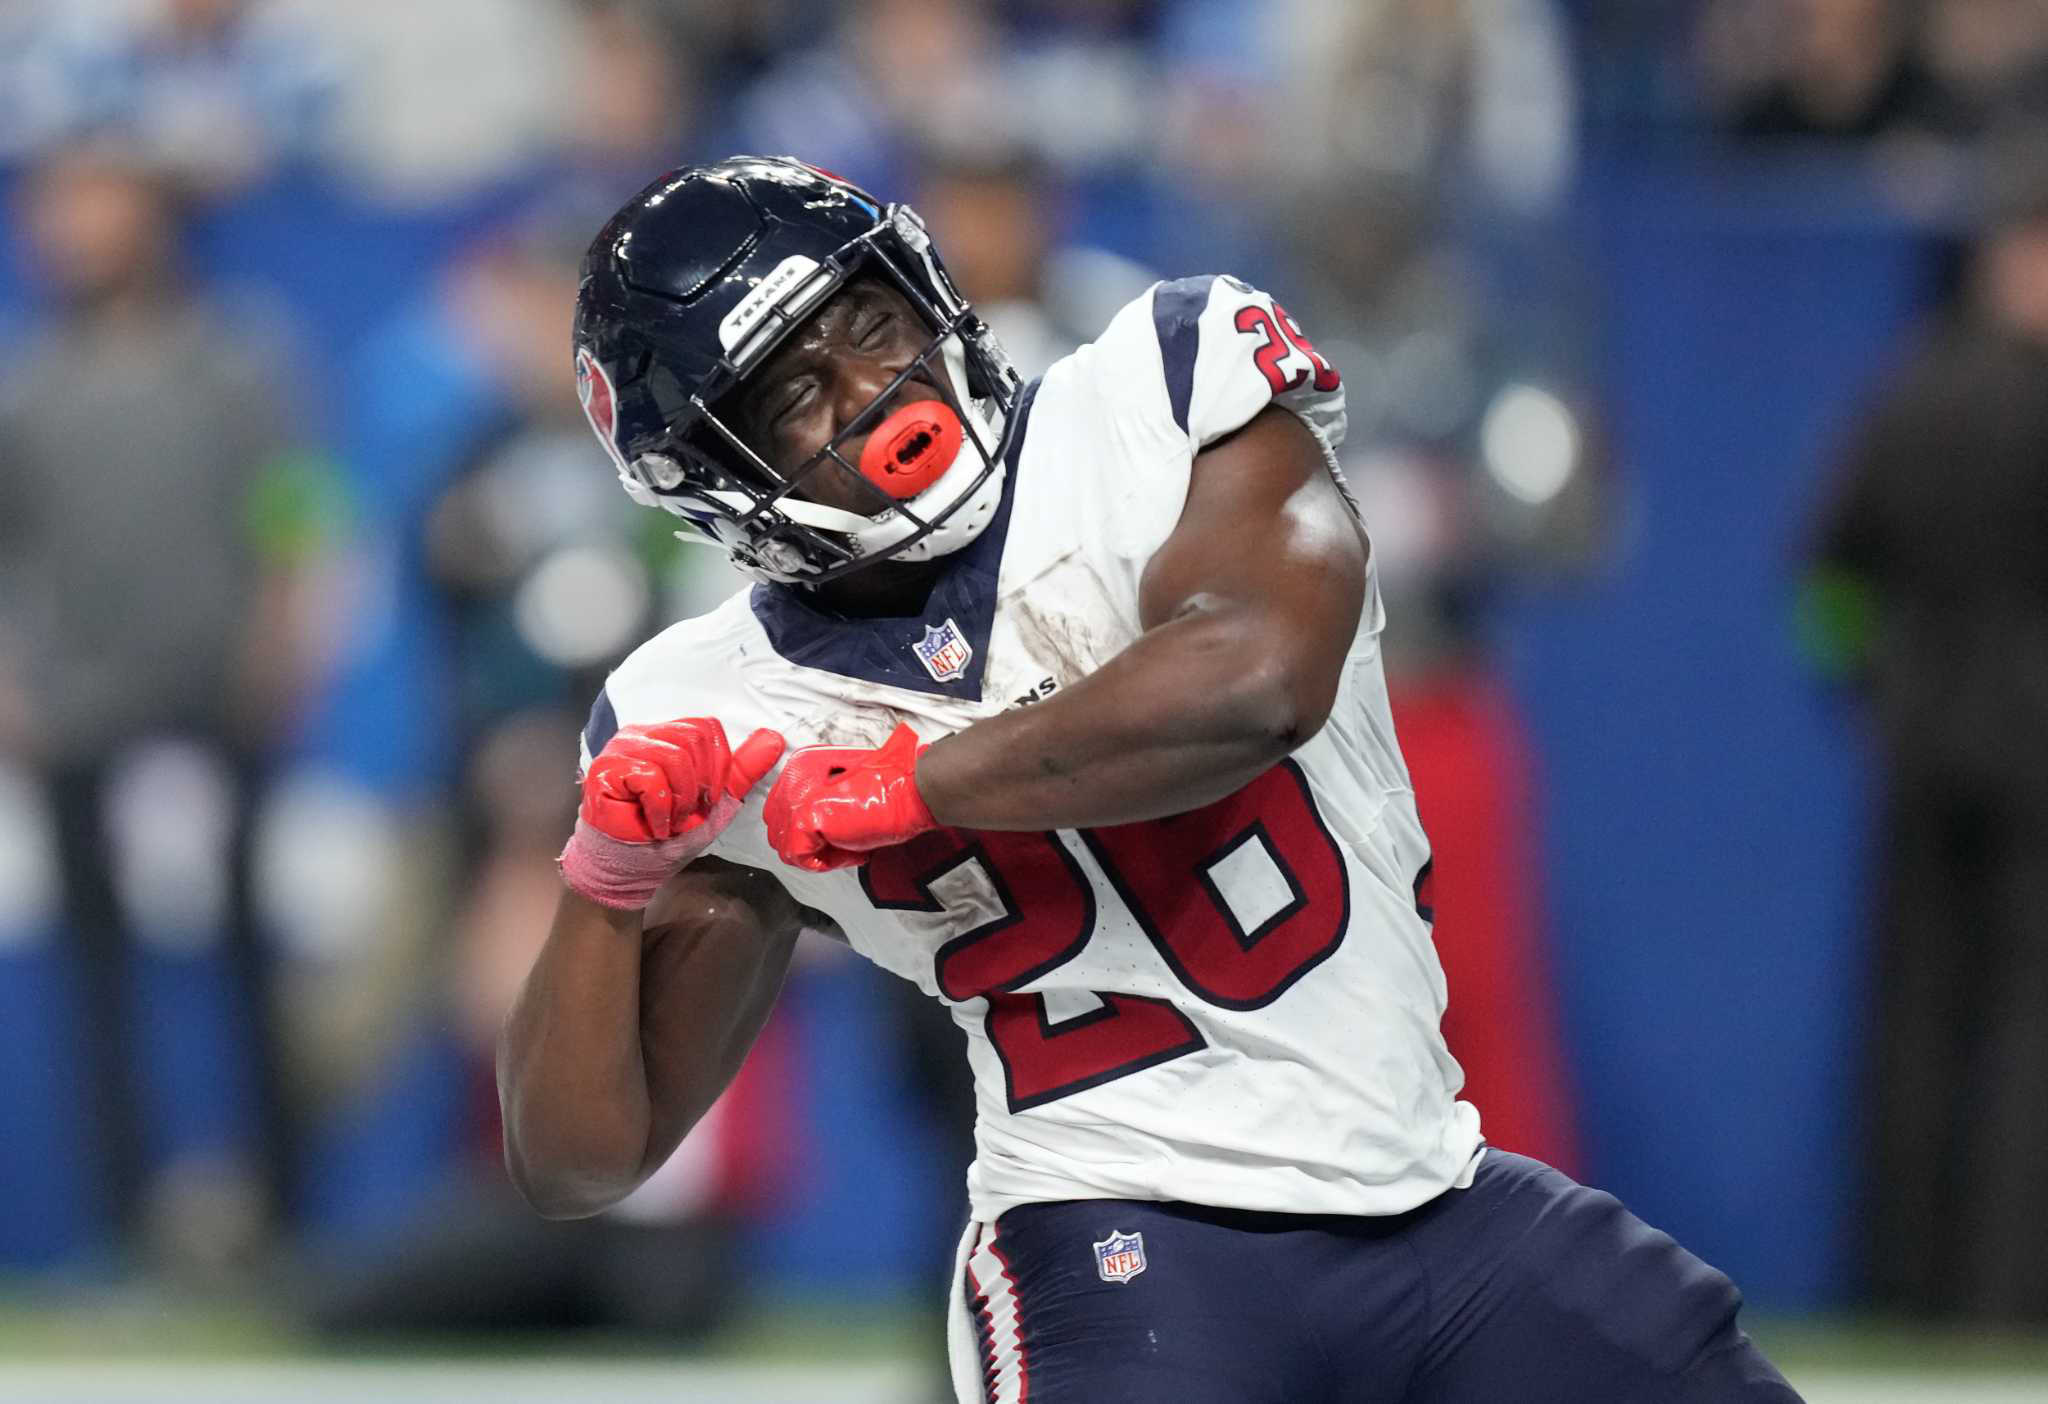 12 plays to playoffs: A look at Texans' winning touchdown drive